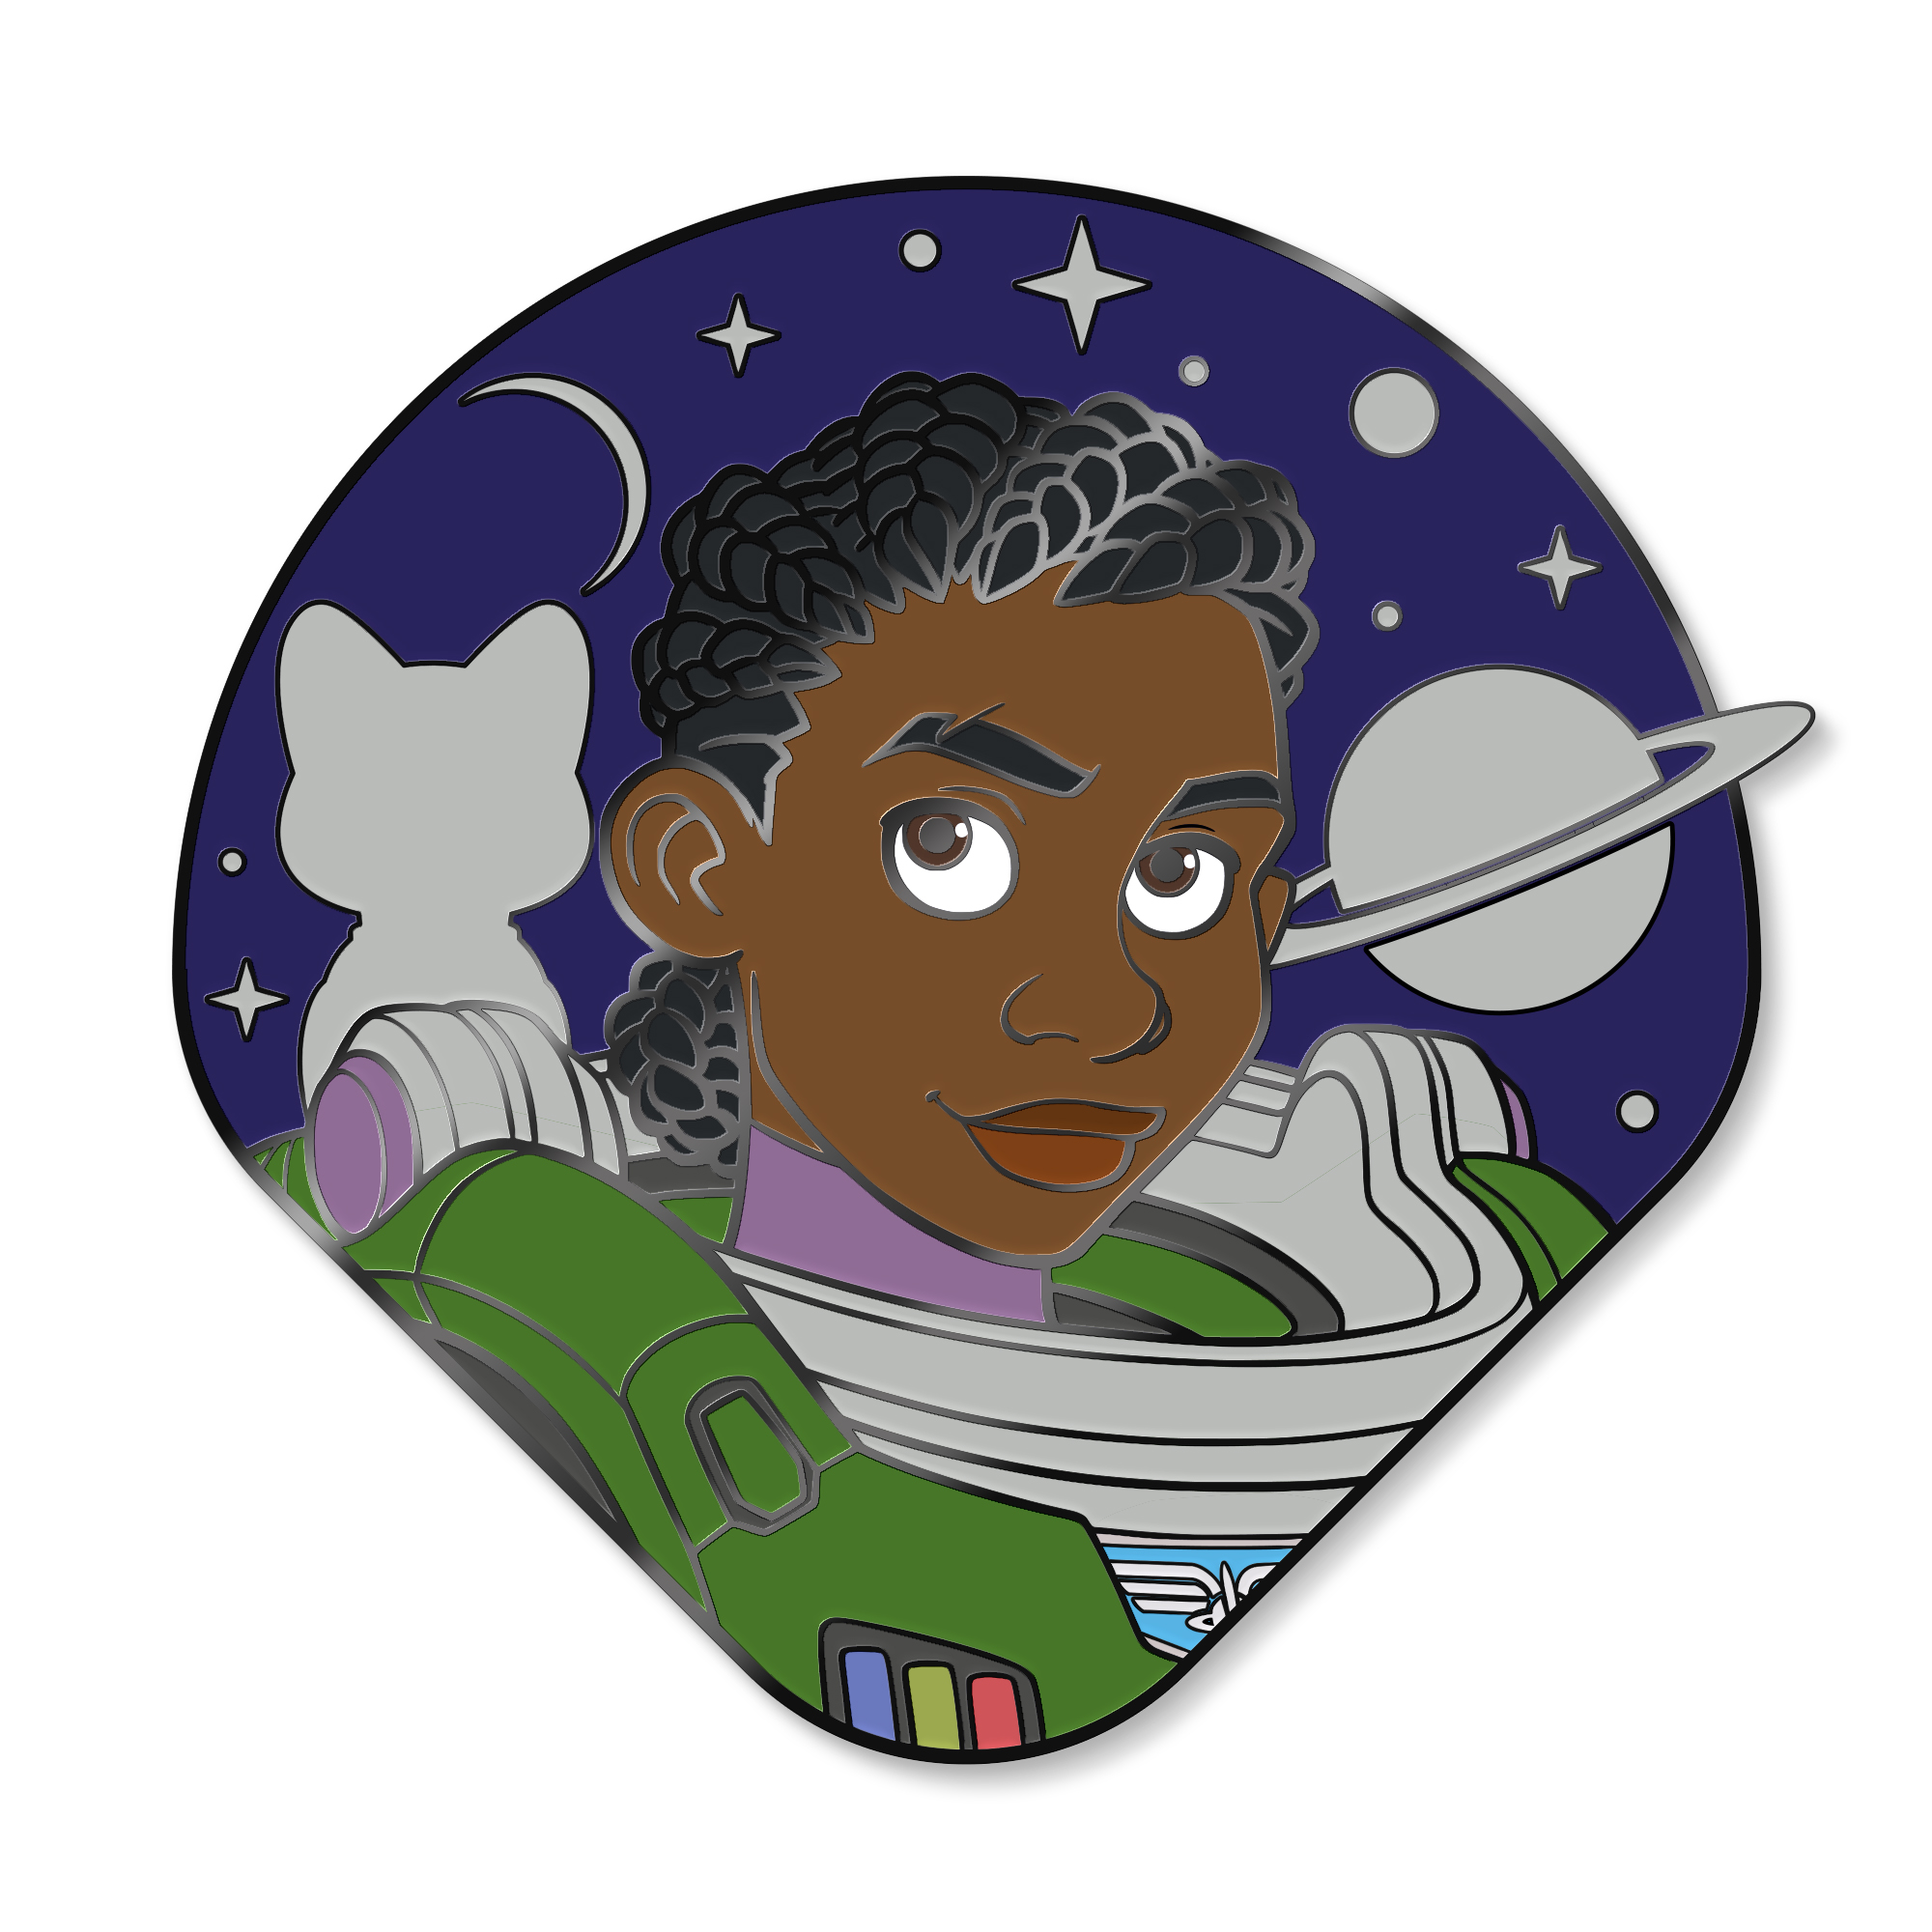 In this image of a D23-created pin to celebrate the Disney and Pixar animated film Lightyear, Alicia Hawthorne is seen wearing a spacesuit; she has curly dark hair. Behind her are white silhouettes of Sox the cat (on the left) and a planet with a ring around it (on the right), set against a dark blue sky with stars and a thin crescent moon.